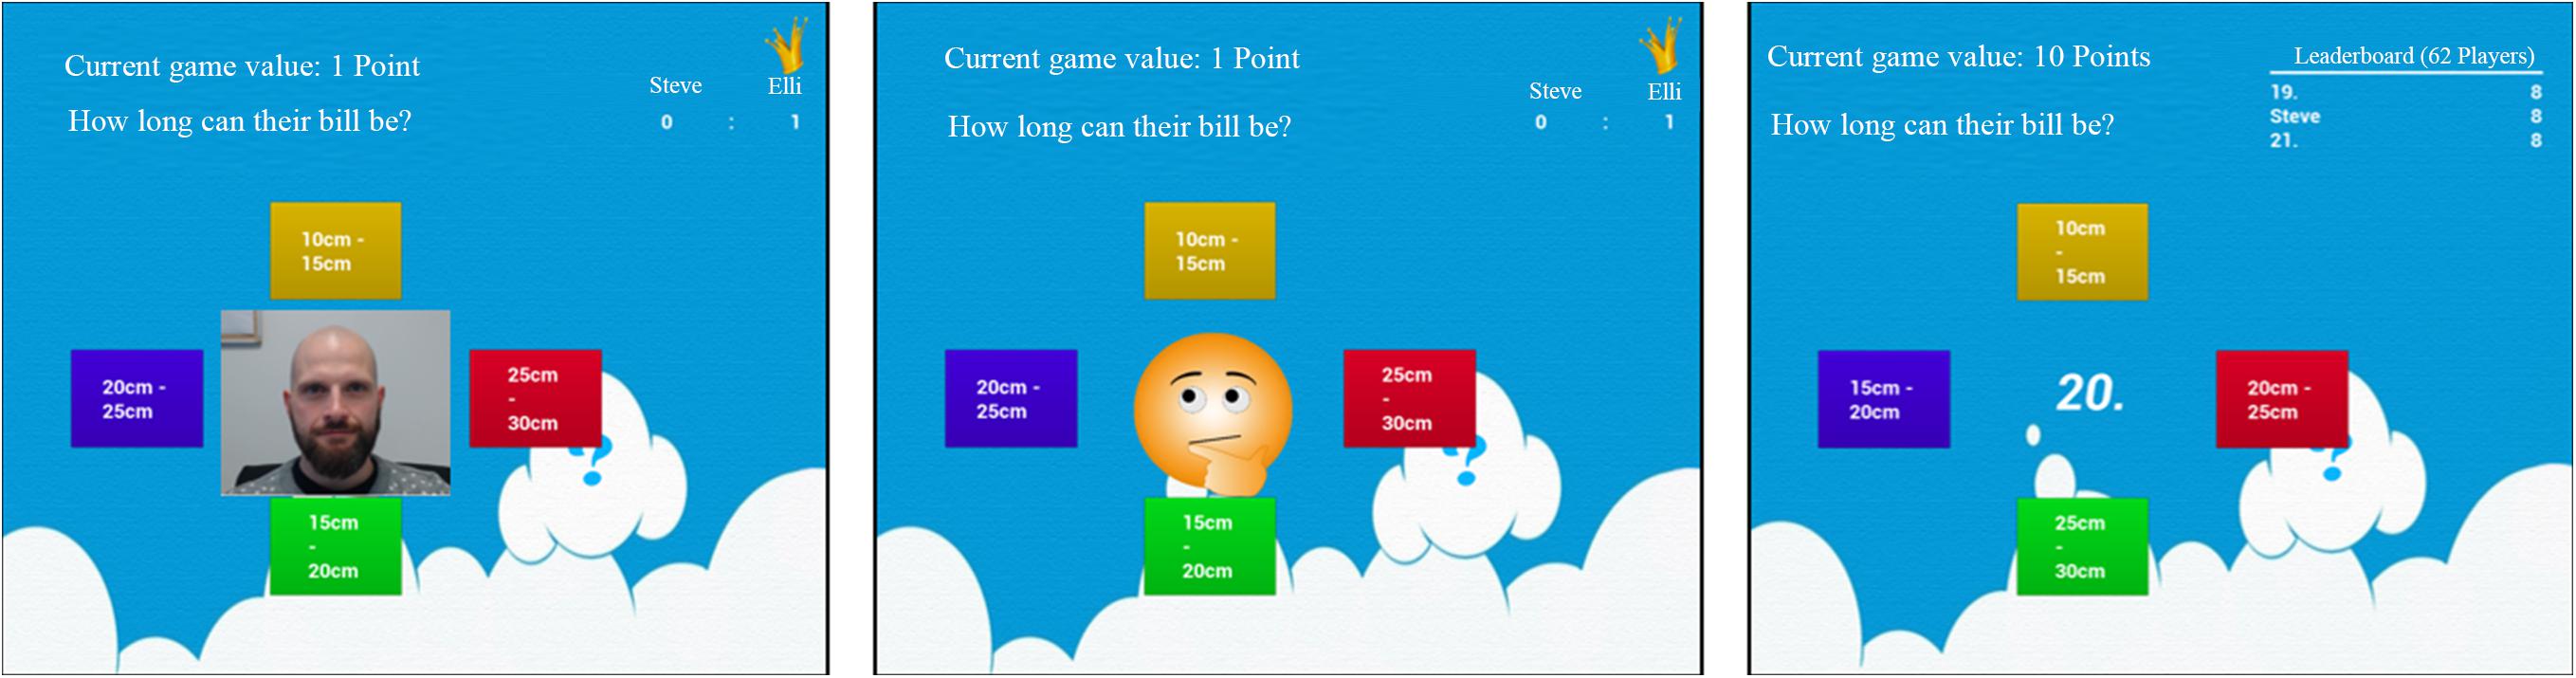 Enhancing Games with Assessment and Metacognitive Emphases (EGAME)